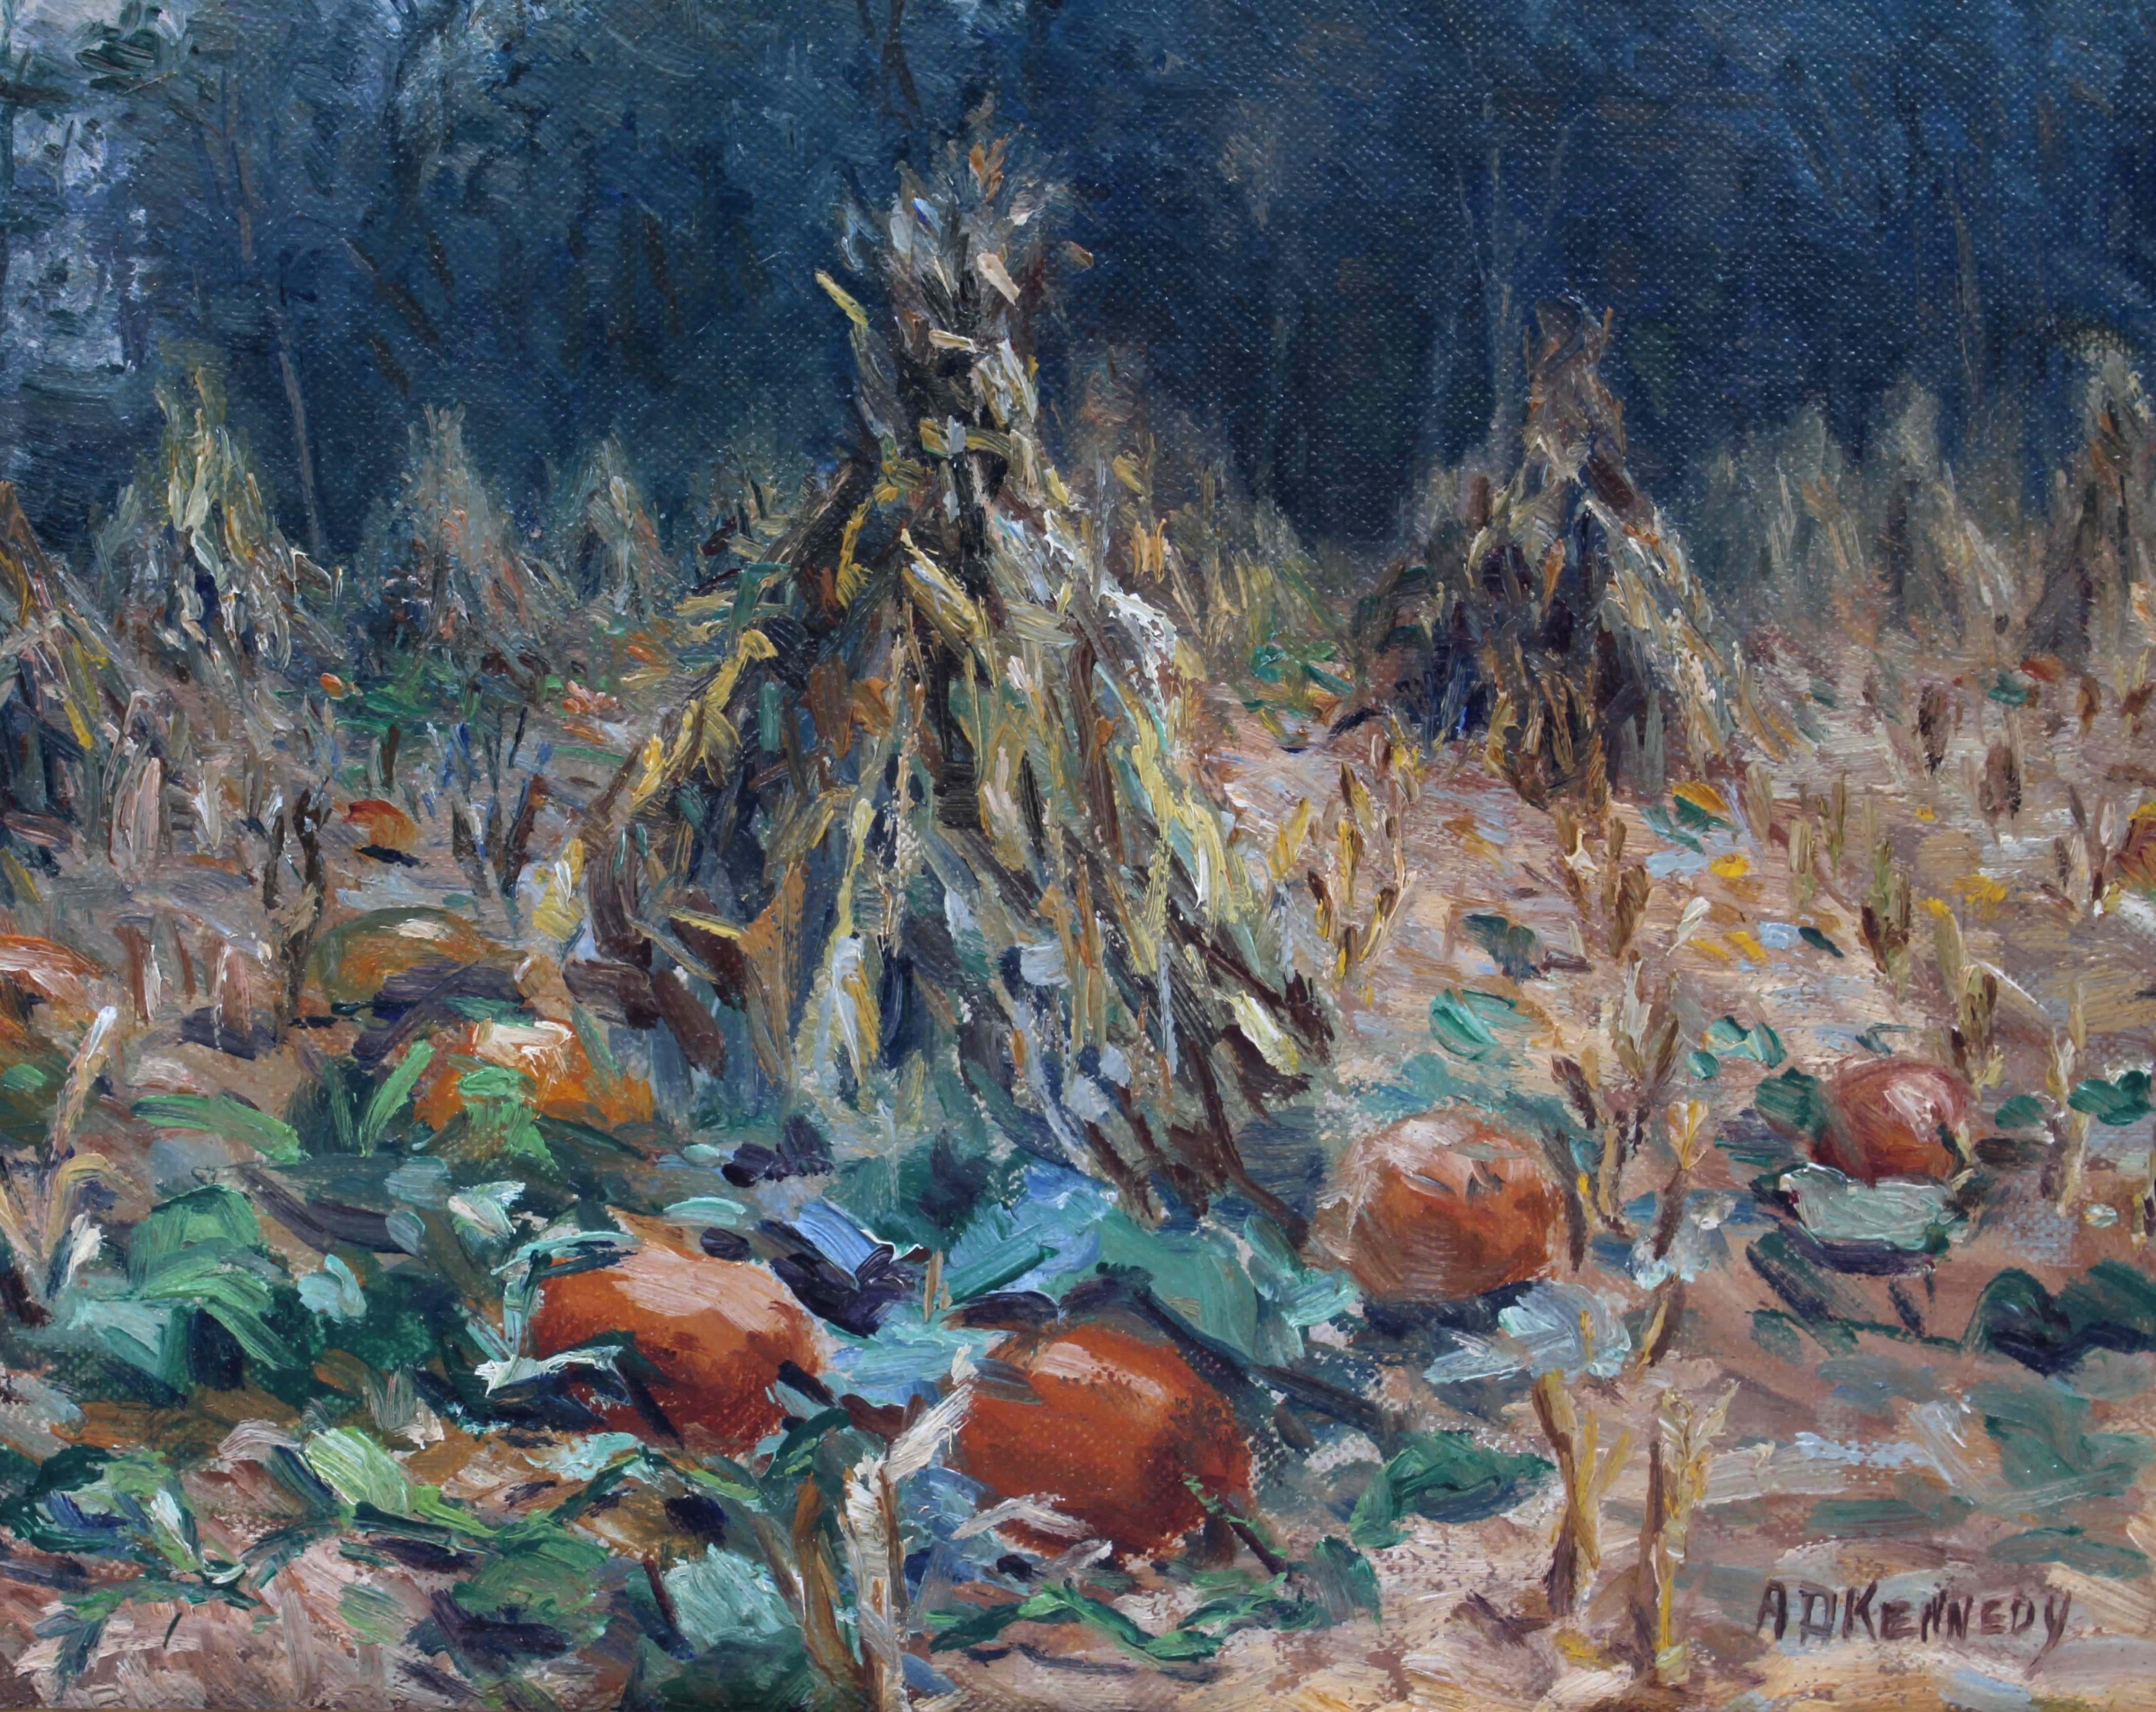 Antique Autumn Fall Landscape Pumpkin Harvest by Kennedy - American Realist Painting by Andrew D. Kennedy